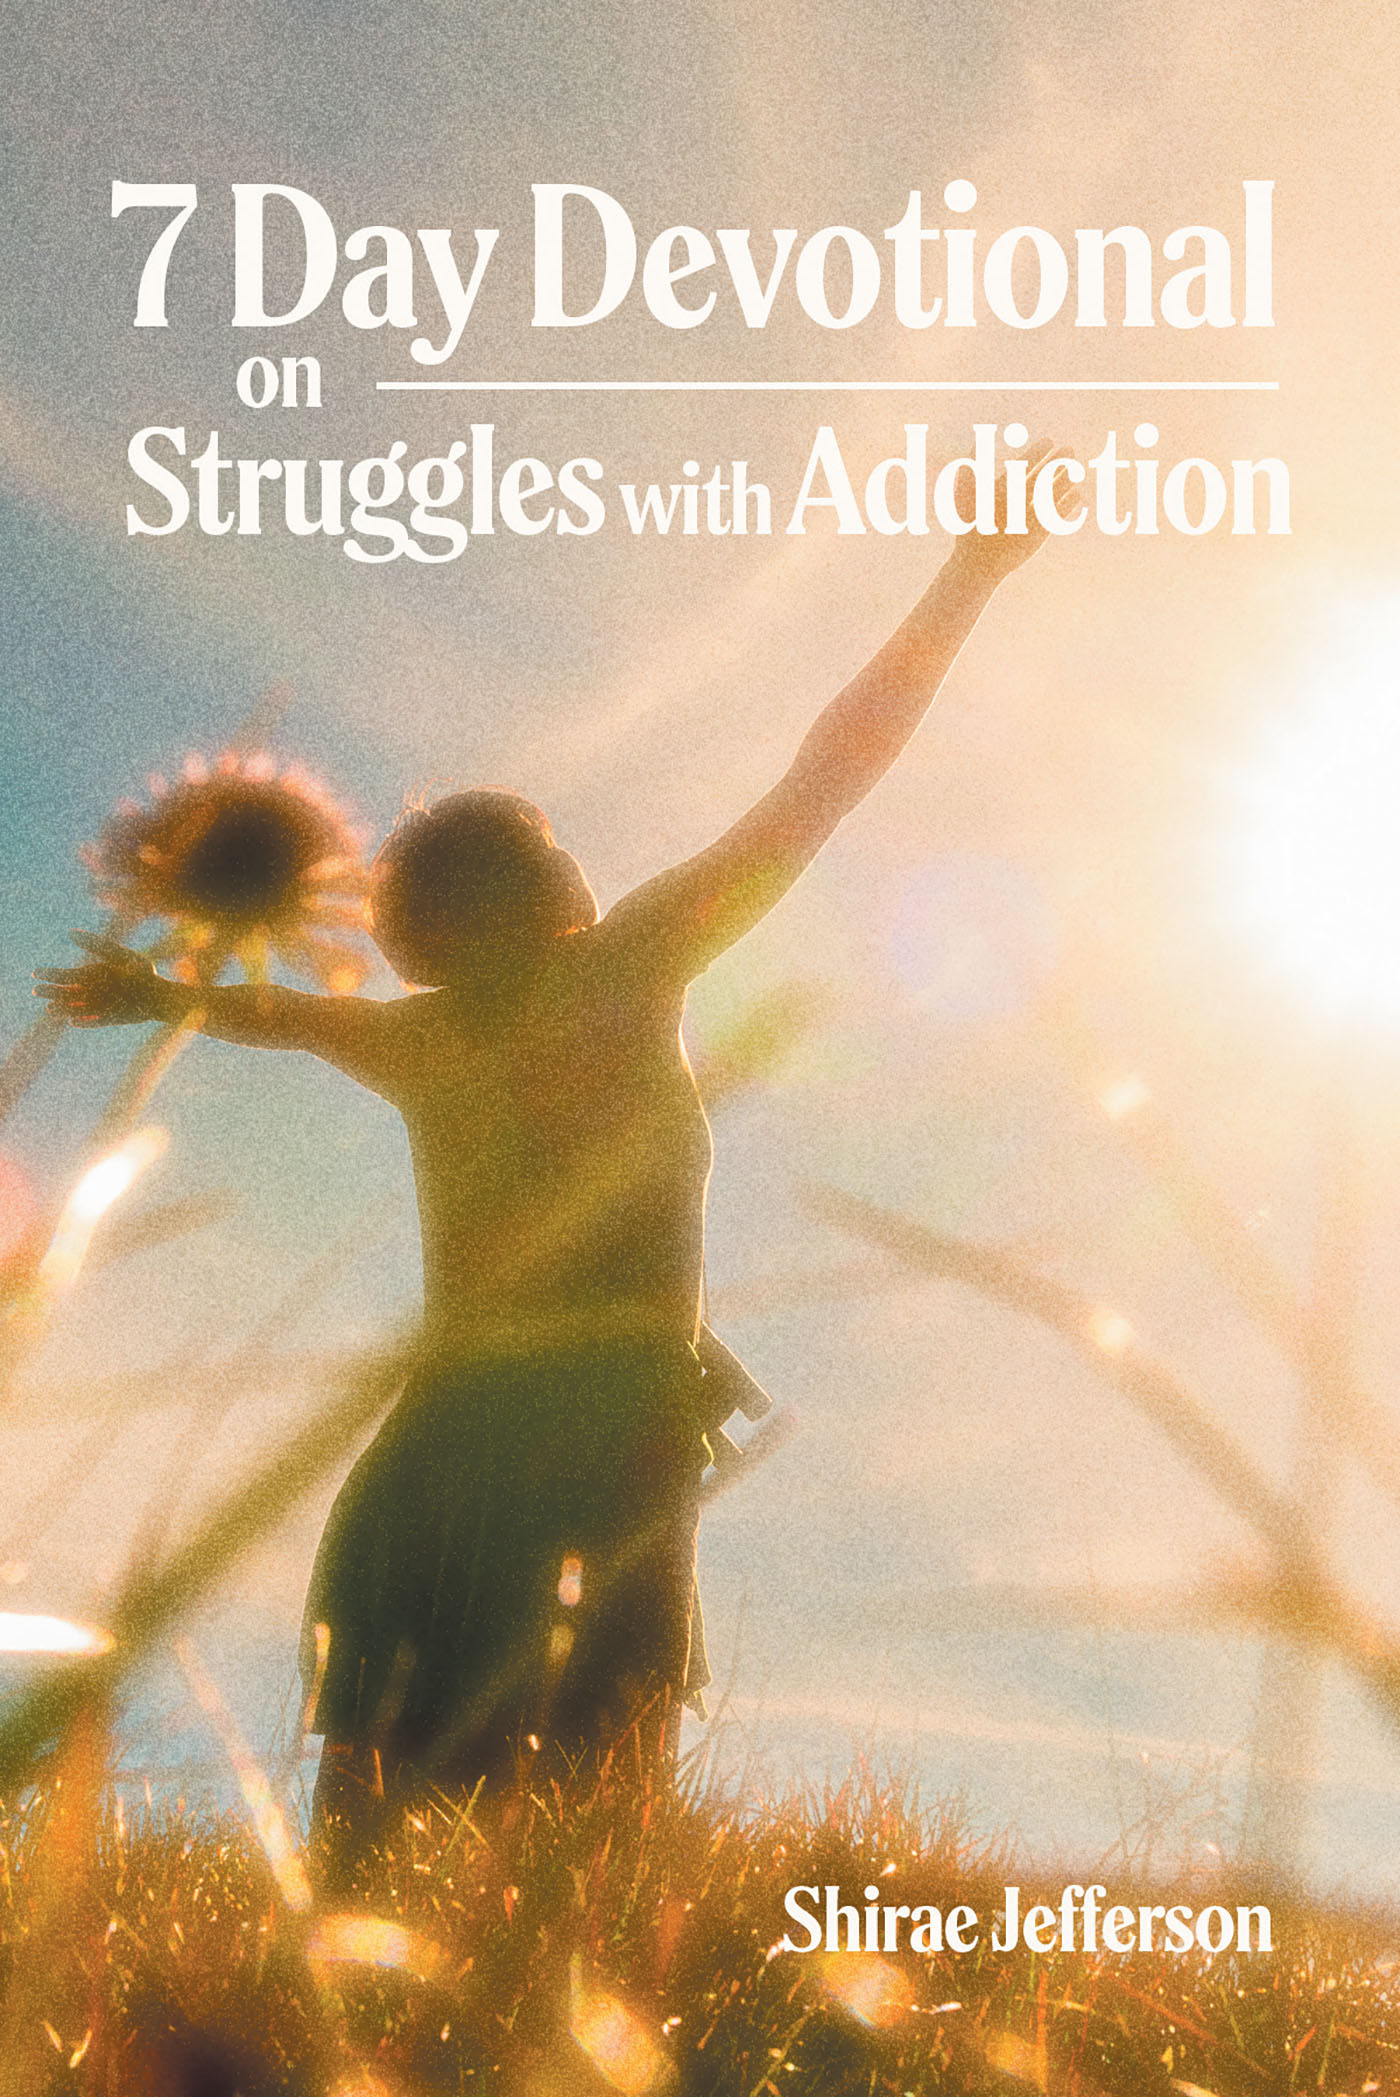 Shirae Jefferson’s Newly Released "7 Day Devotional on Struggles with Addiction" is an Encouraging Approach to Breaking the Pattern of Addiction